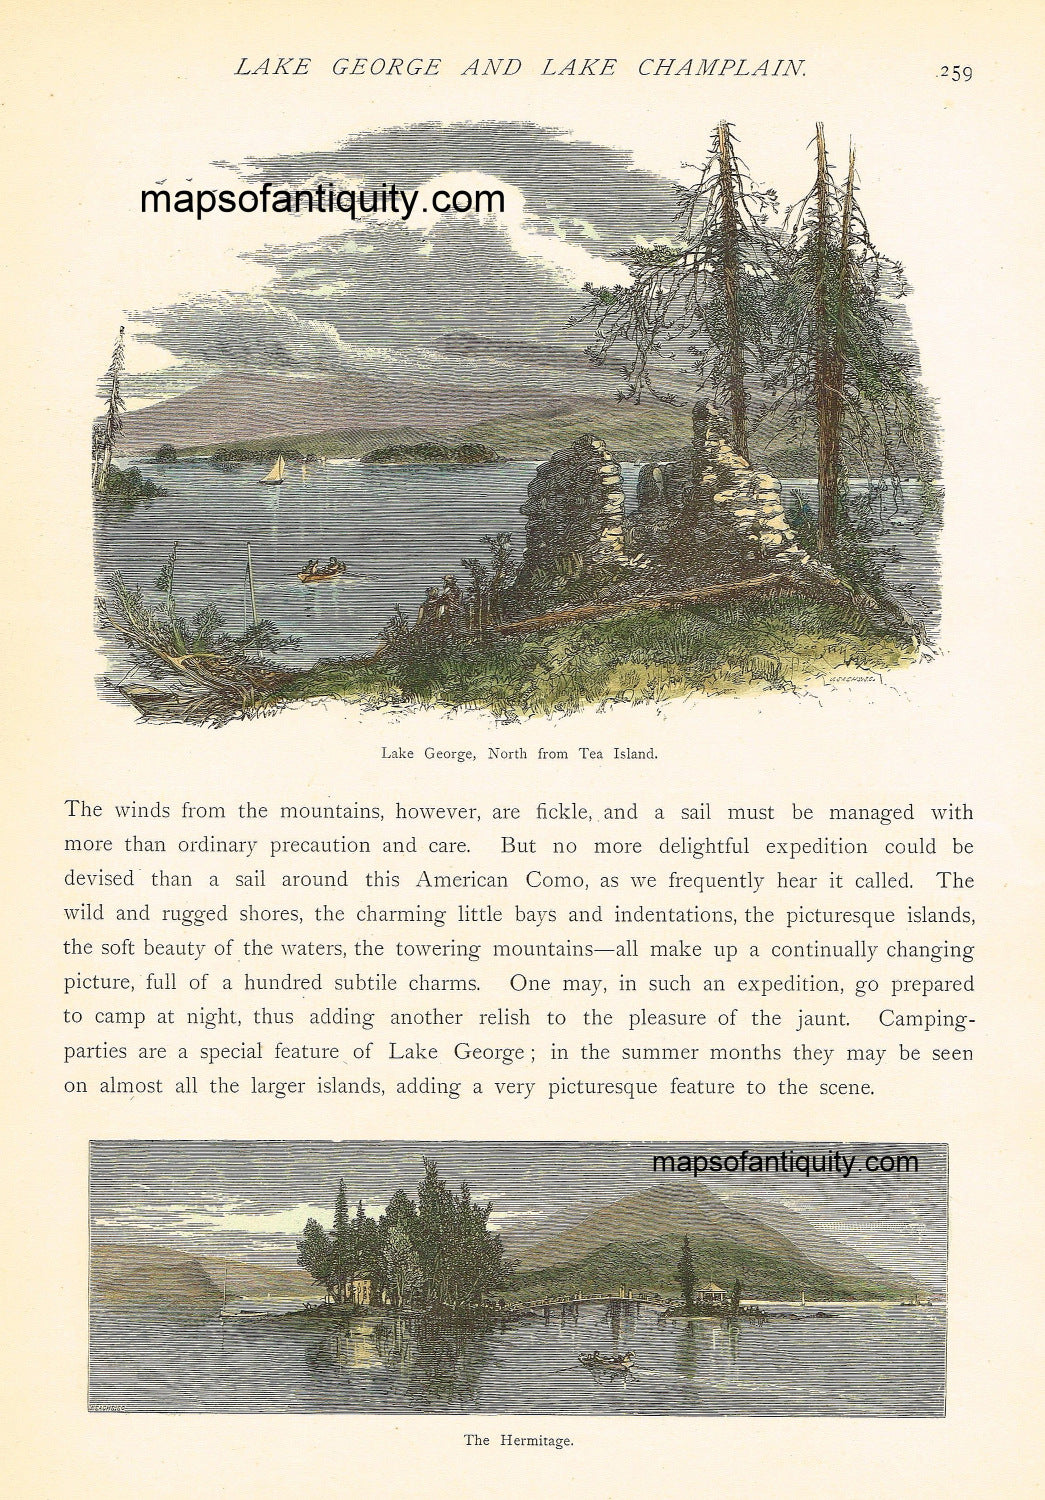 Hand-Colored-Antique-Engraving-Lake-George-North-from-Tea-Island-and-The-Hermitage-New-York-**********-New-York--1872-Picturesque-America-Maps-Of-Antiquity